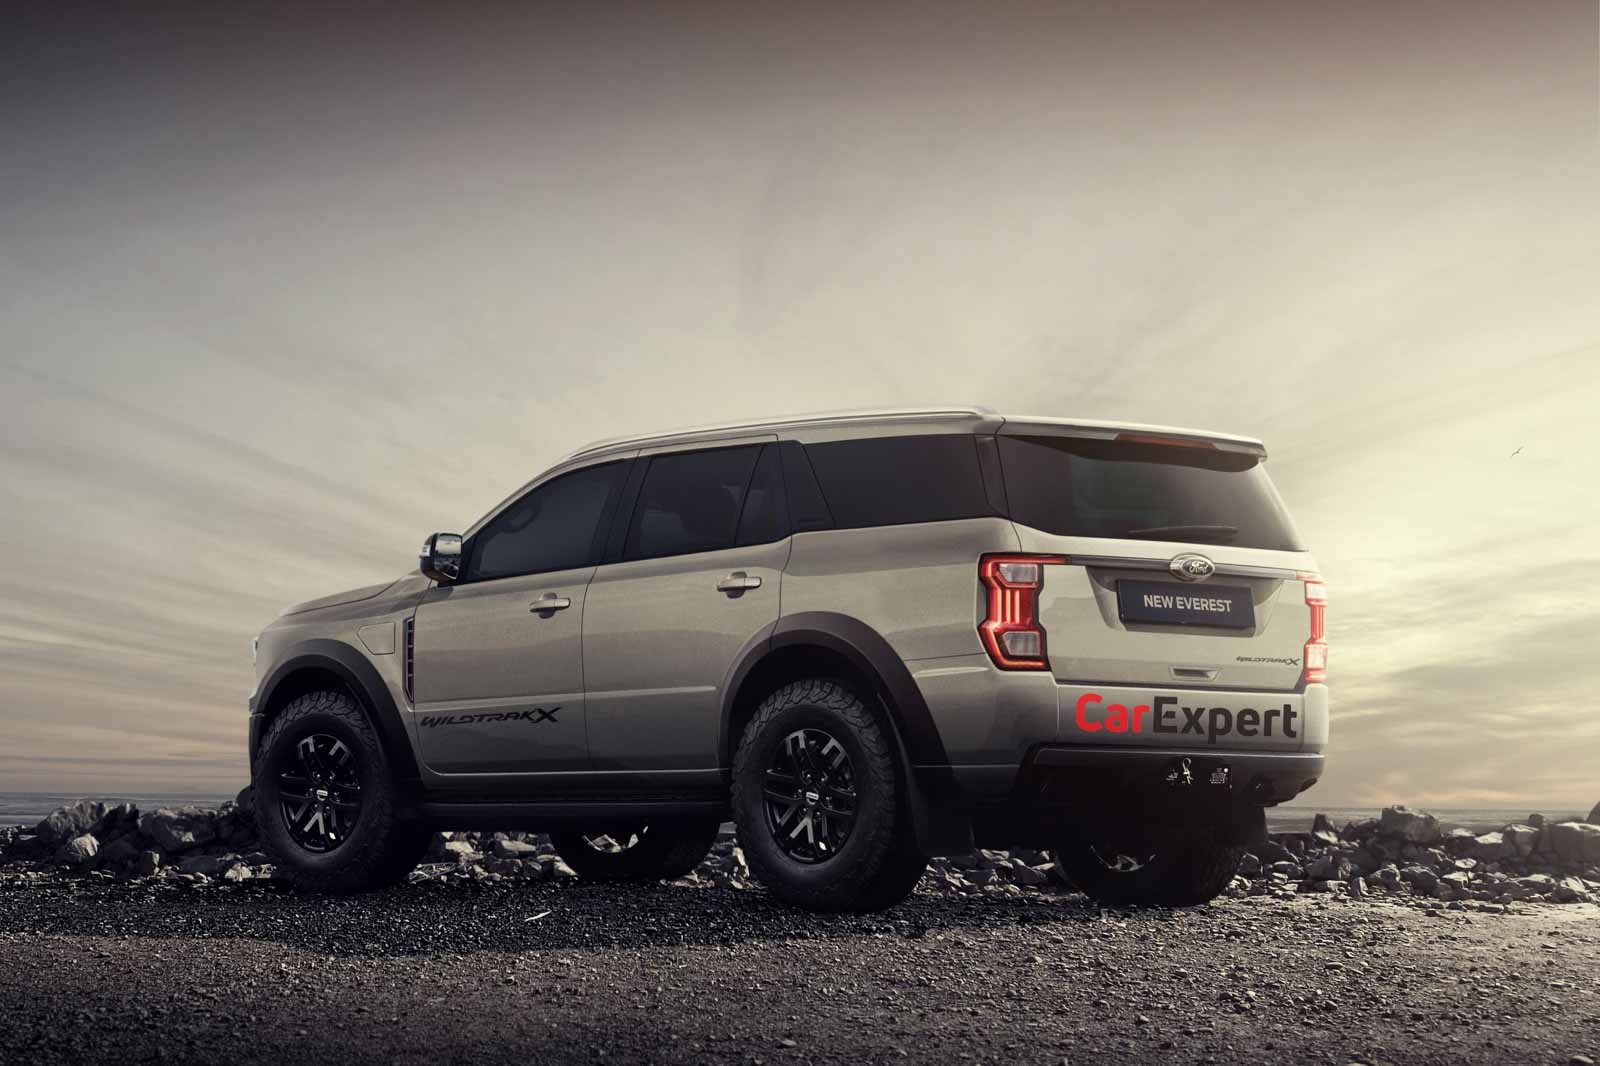 2022 Ford Endeavour To Be Heavily Inspired By F-150 Pickup Truck